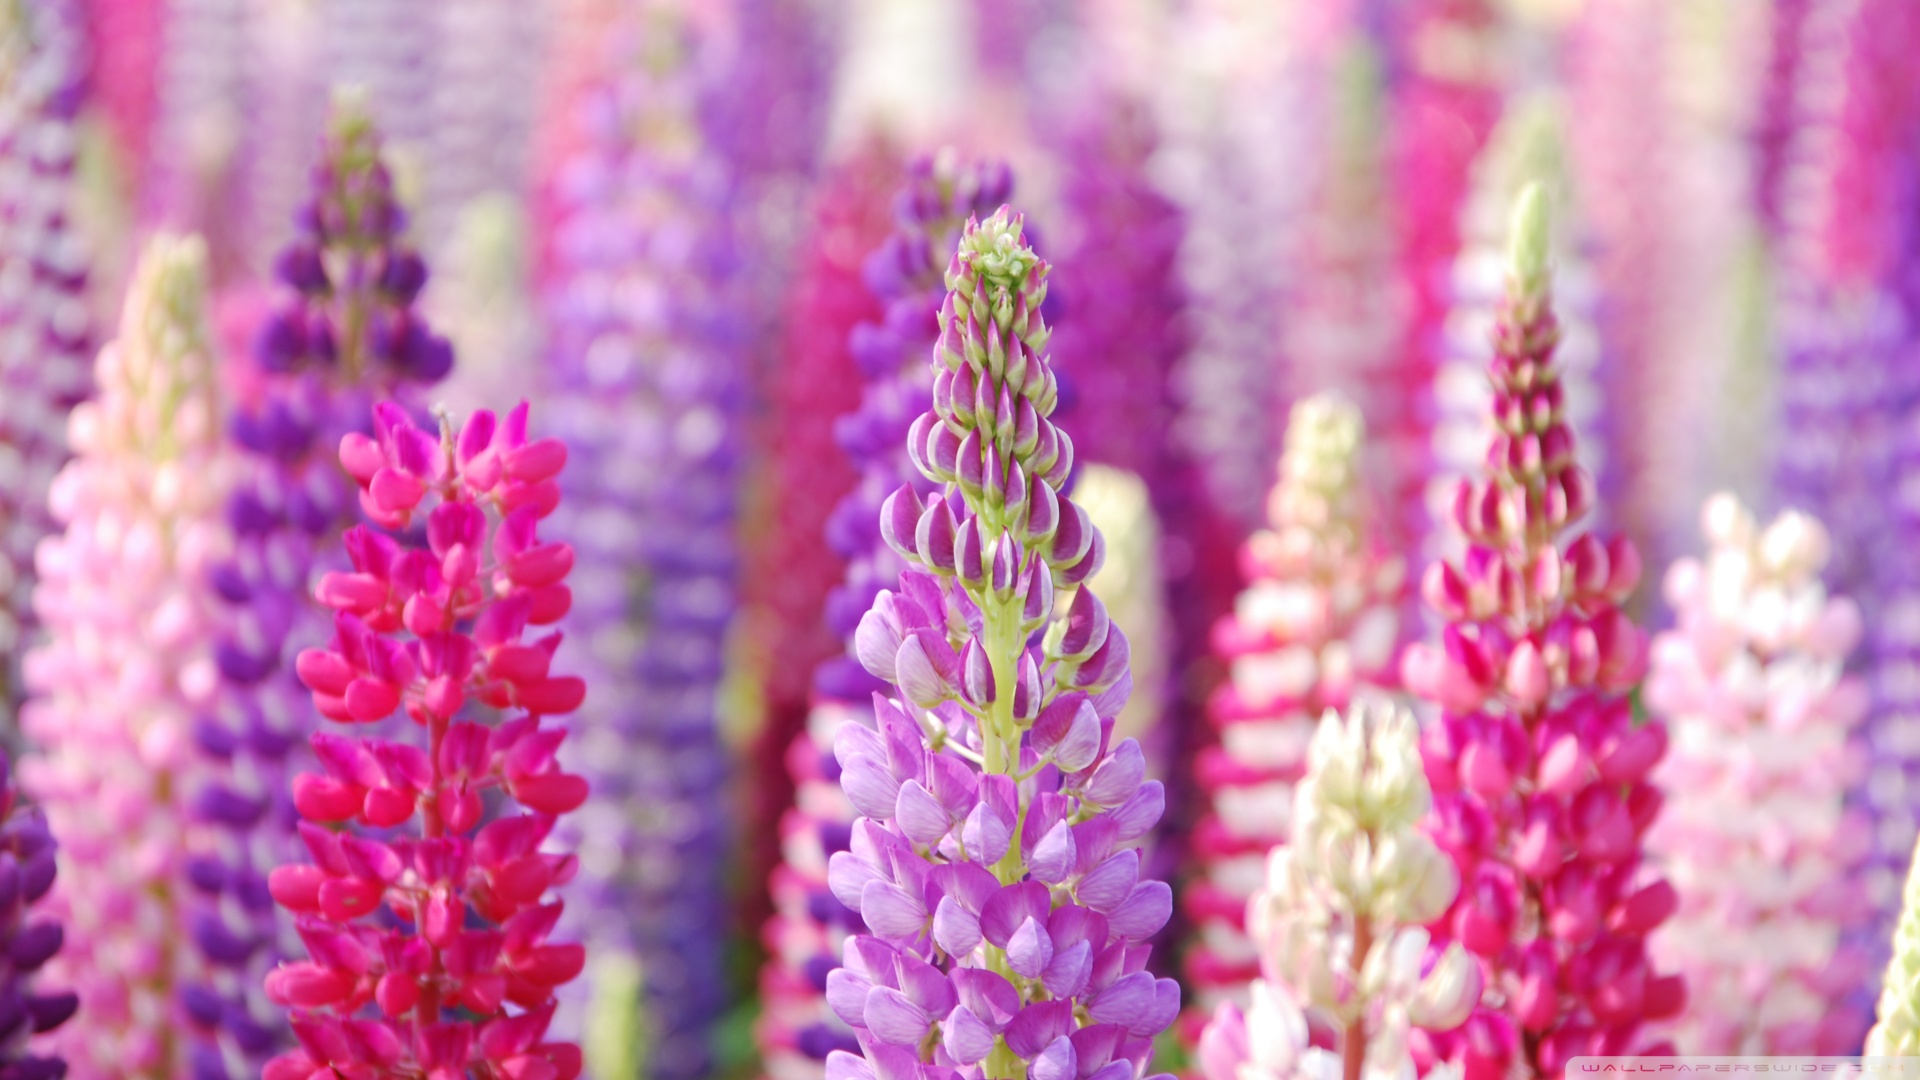 pink wallpaper flowers purple lupin images 1920x1080 1920x1080